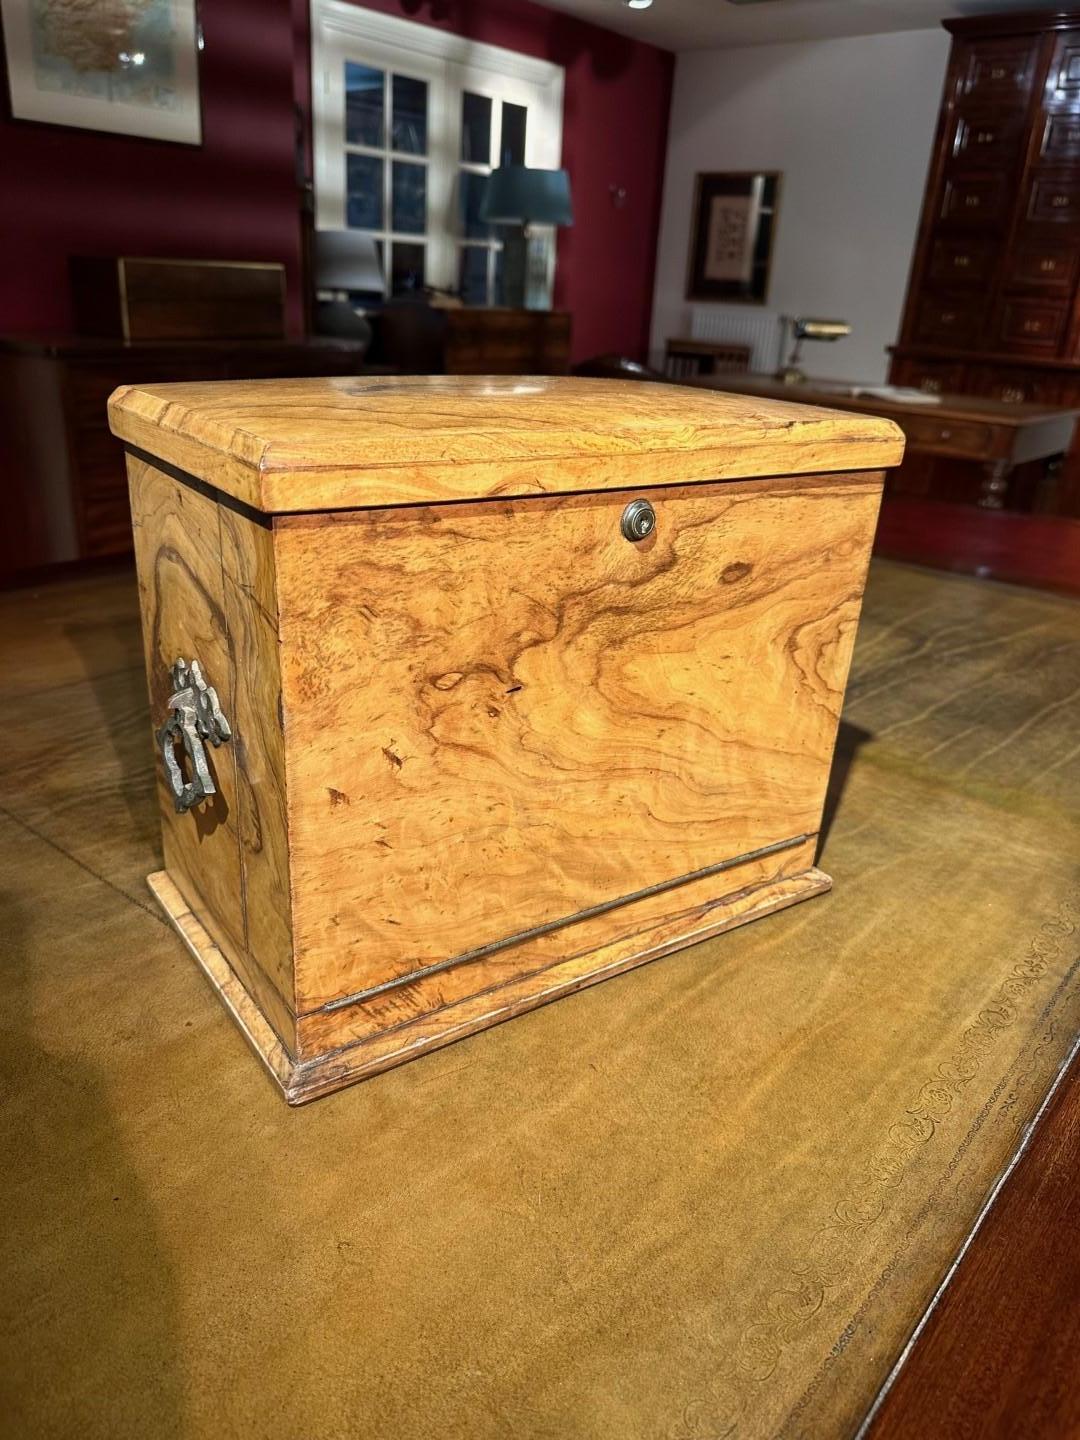 A top quality example of a late Victorian writing box.
This example is made of beautiful olive wood with sturdy cast copper handles on both sides,
The fold-down front reveals the beautifully decorated interior; when the front drops down, the